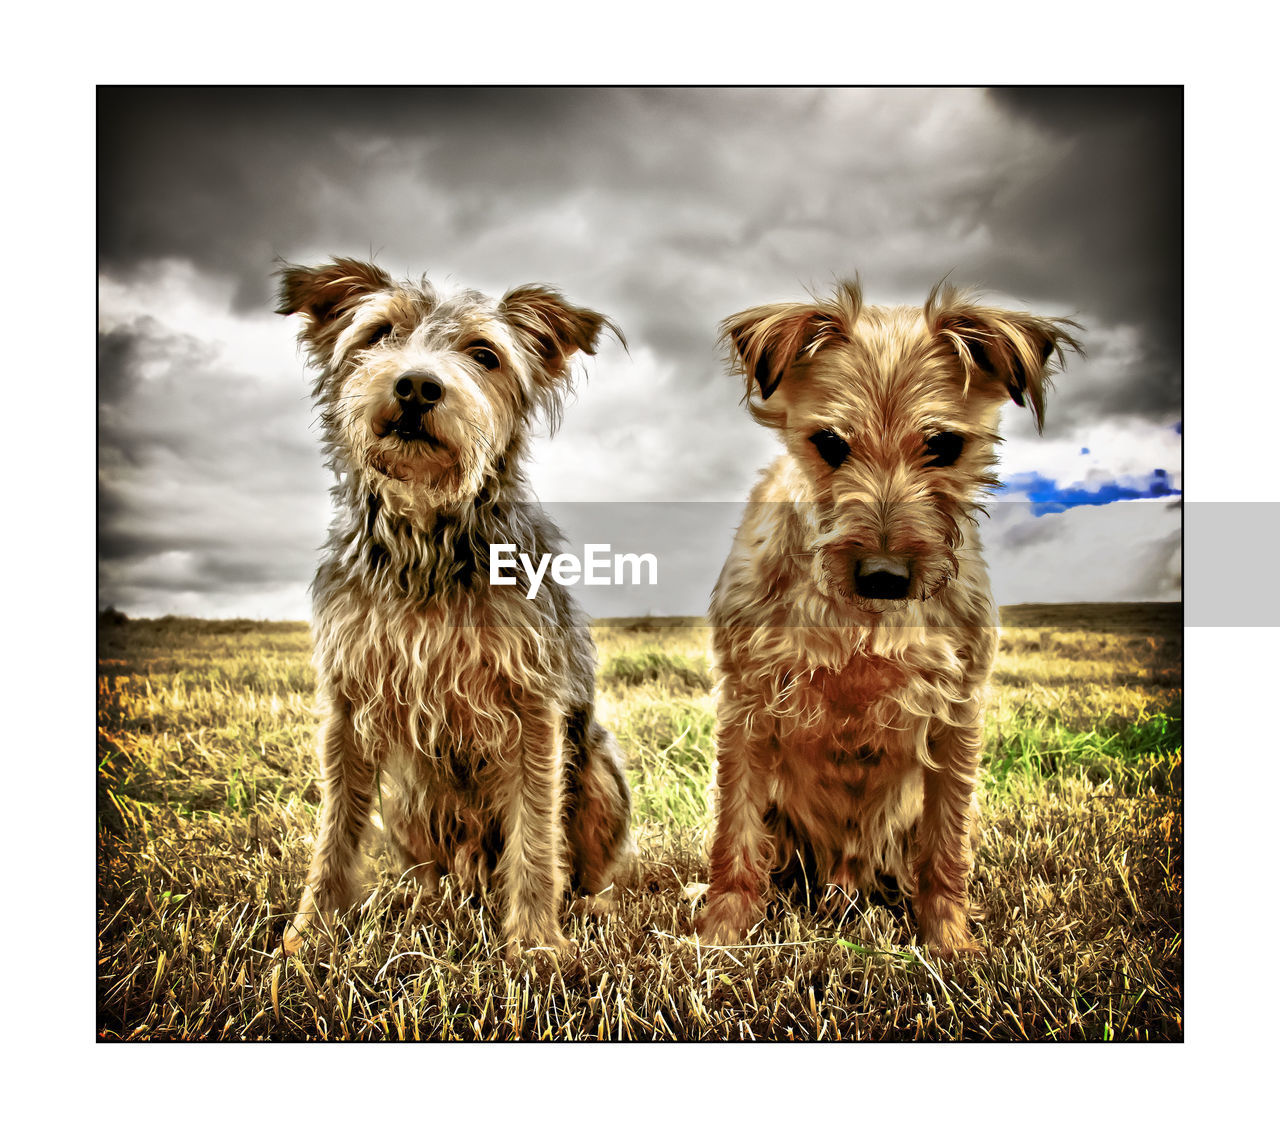 Yorkshire terriers on grassy field against cloudy sky